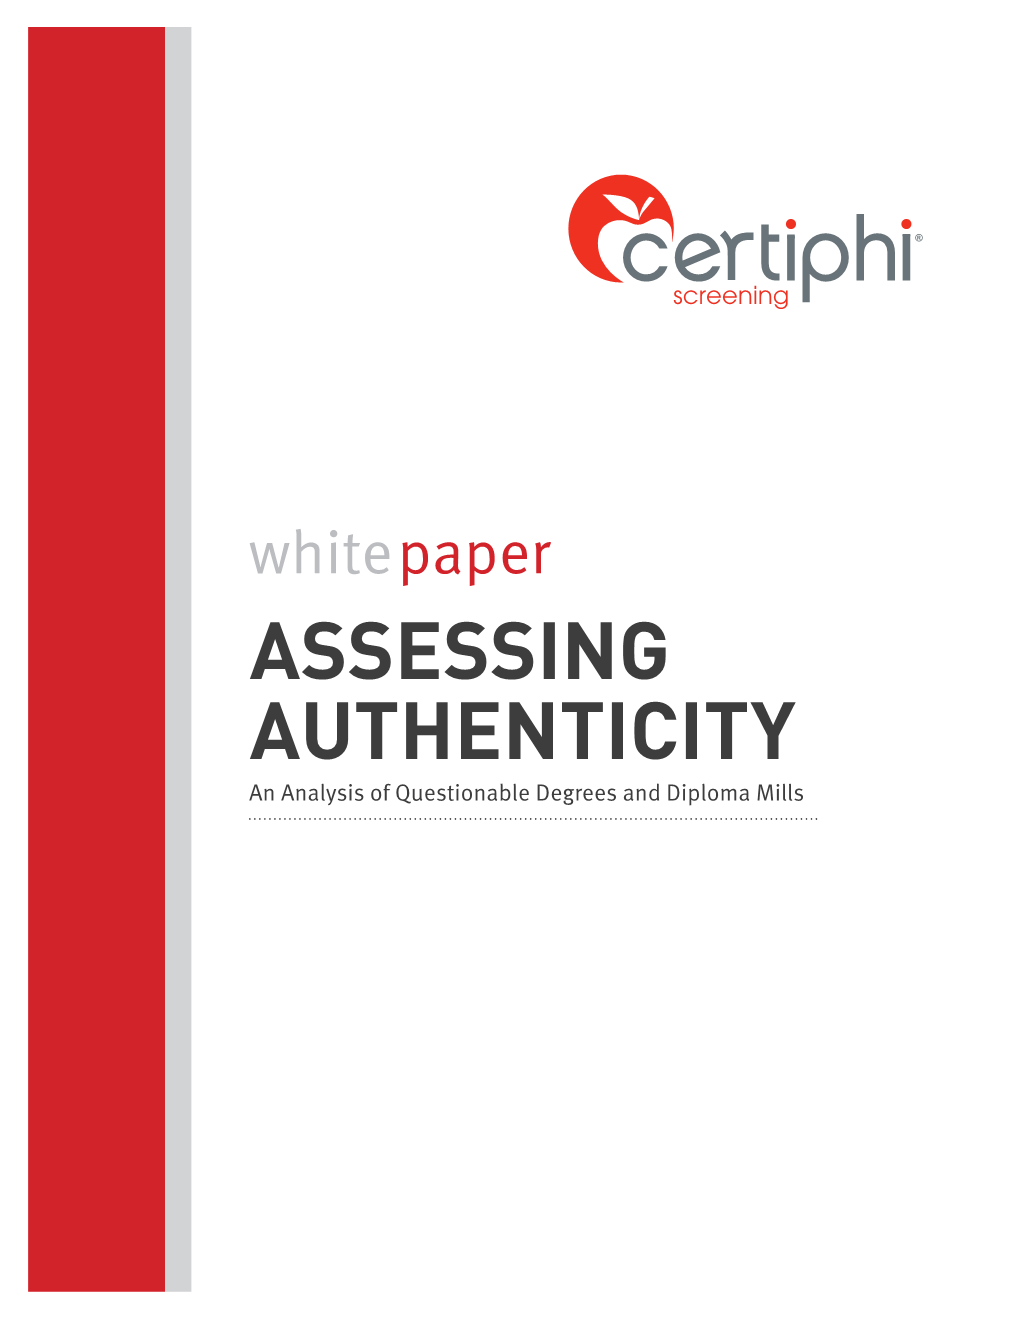 ASSESSING AUTHENTICITY an Analysis of Questionable Degrees and Diploma Mills Whitepaper ASSESSING AUTHENTICITY